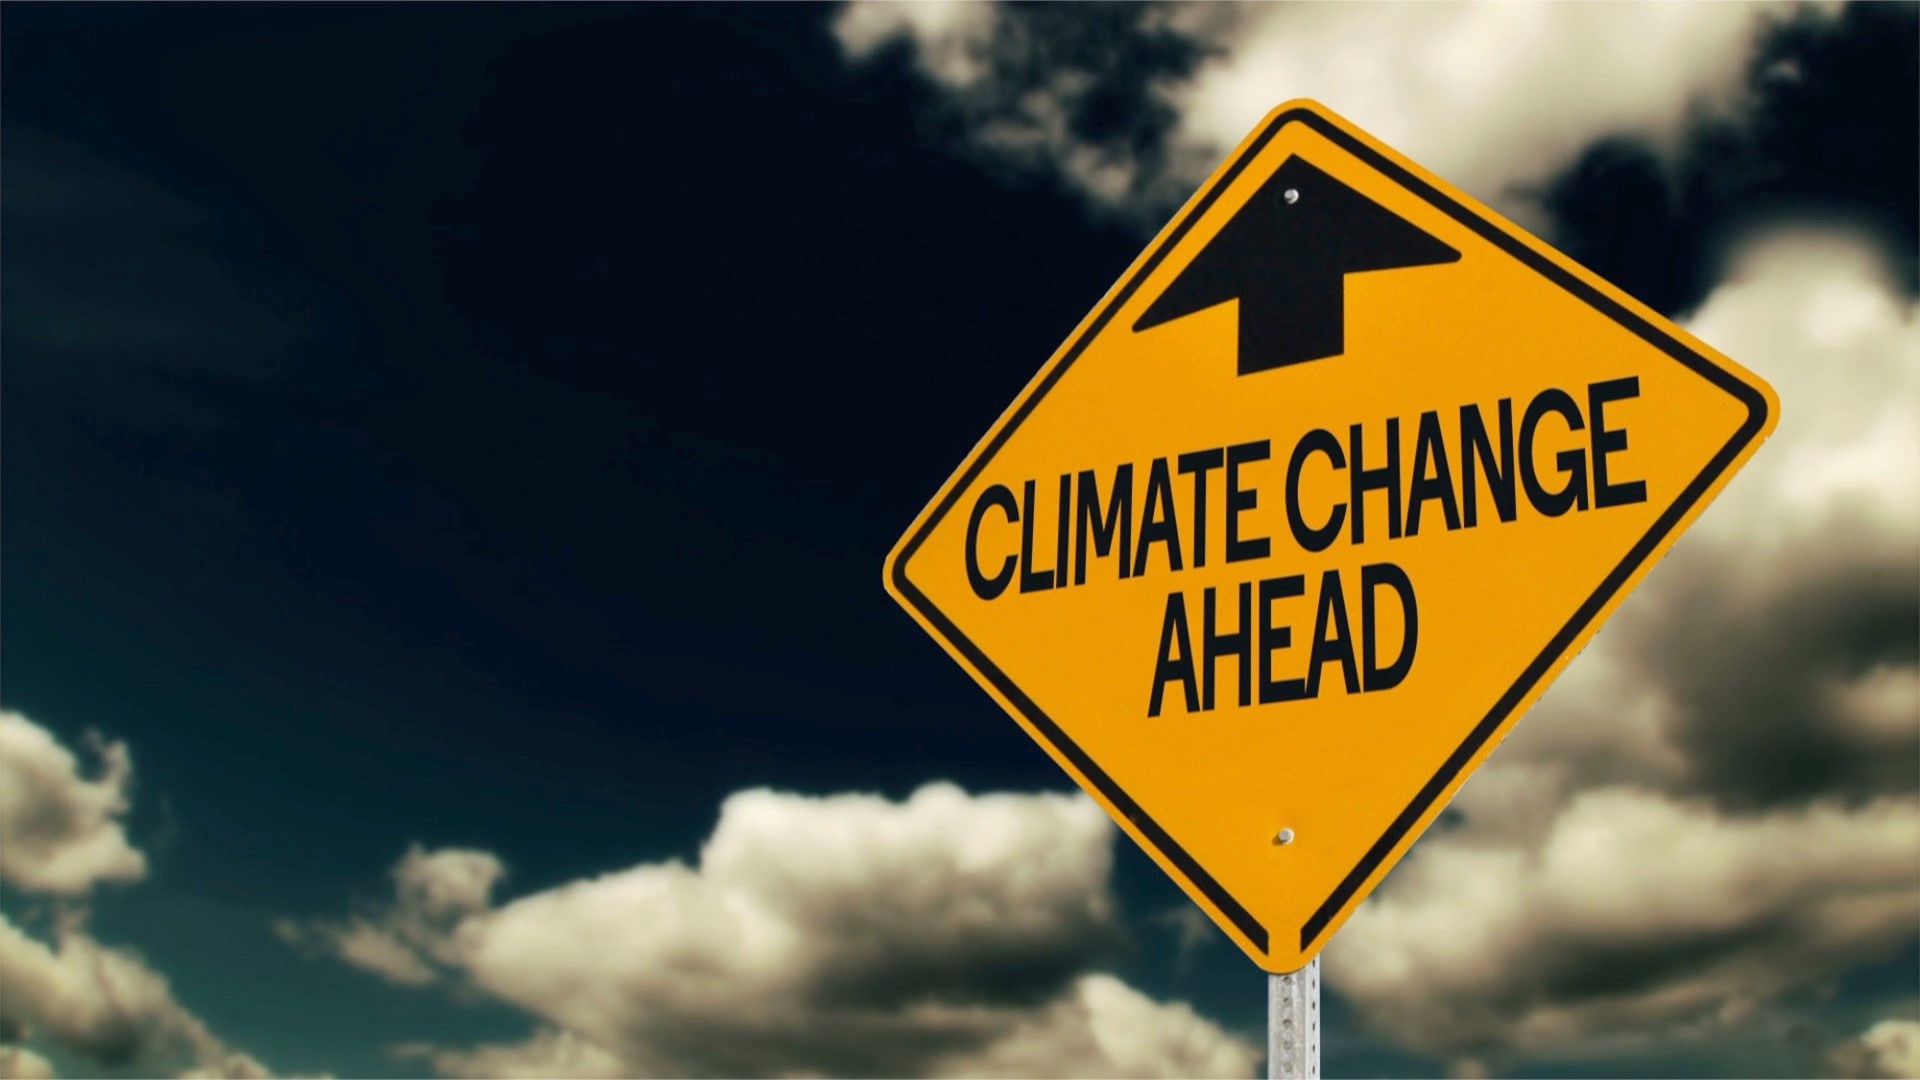 Teens are threatening not to have children among climate change crisis. Veuer's Natasha Abellard has the story.